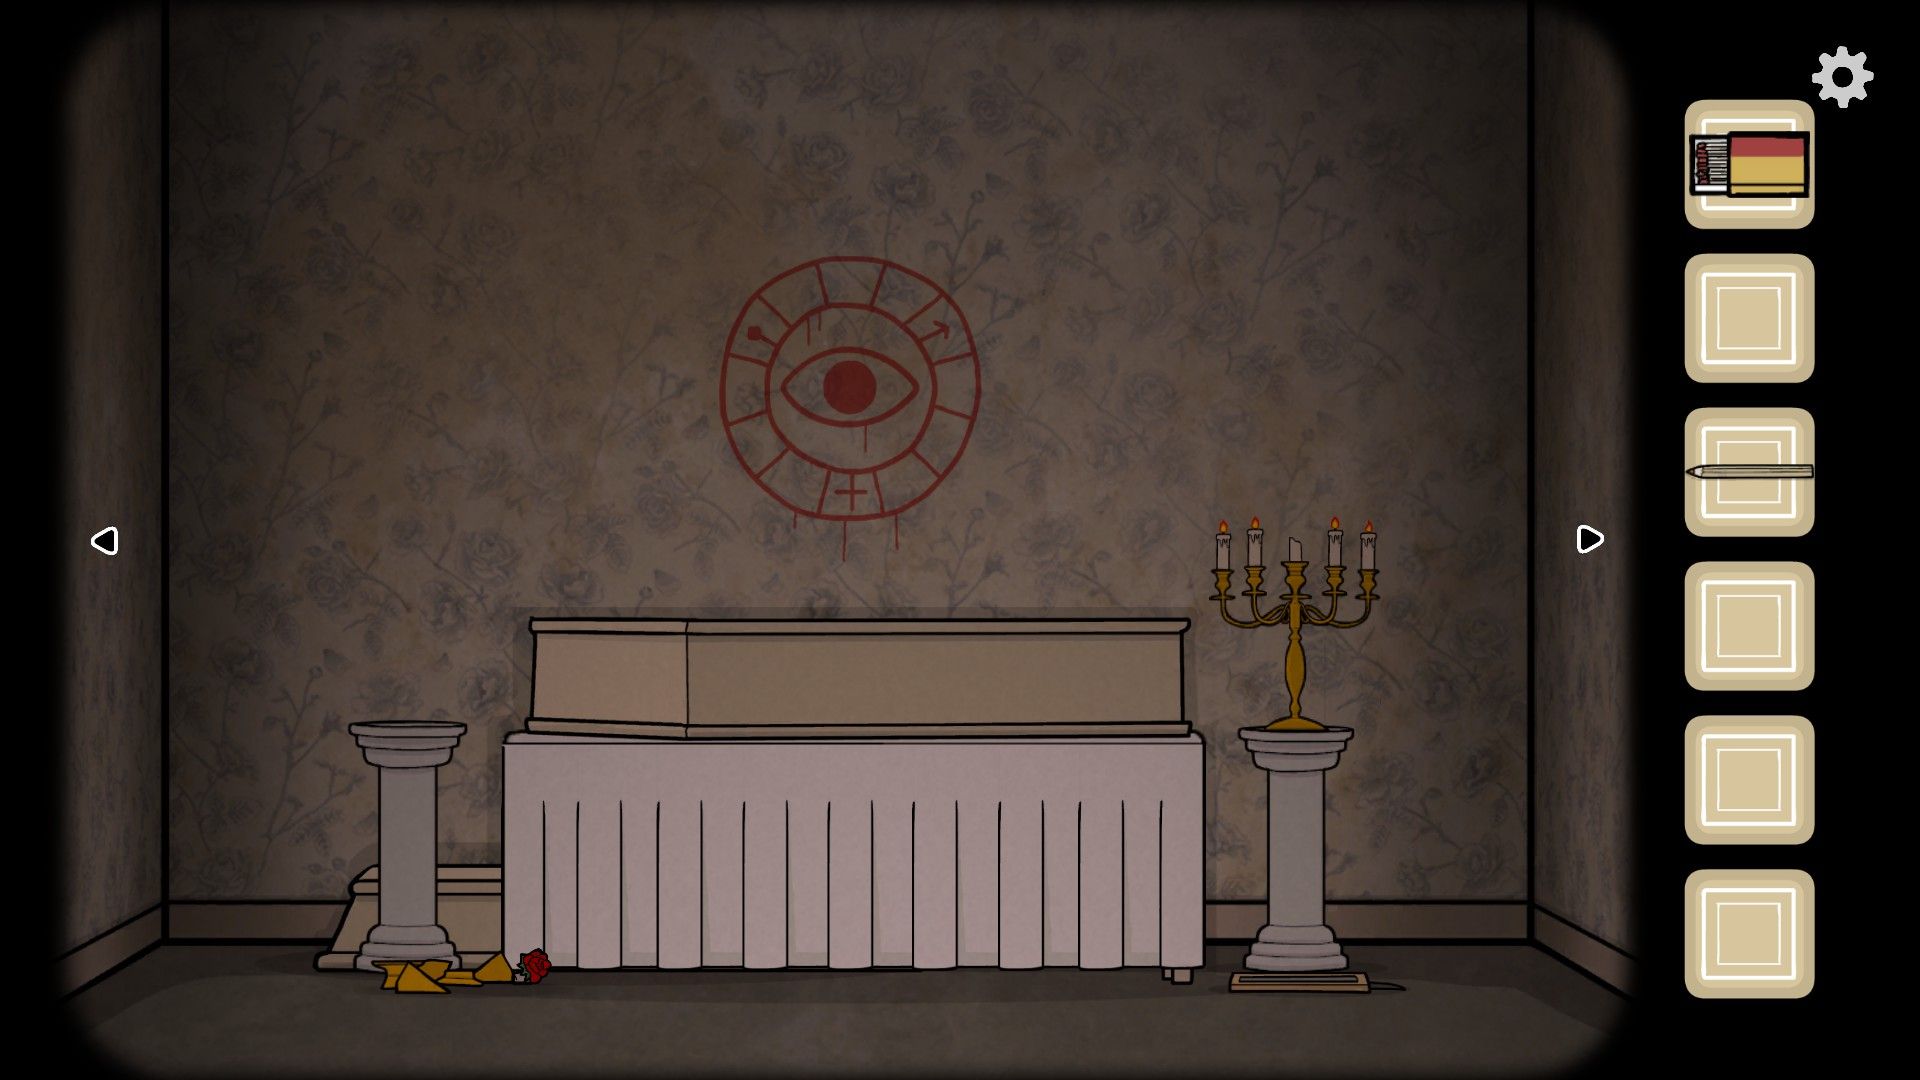 The Past Within's casket and an eye in a circle drawn in red on the wall.